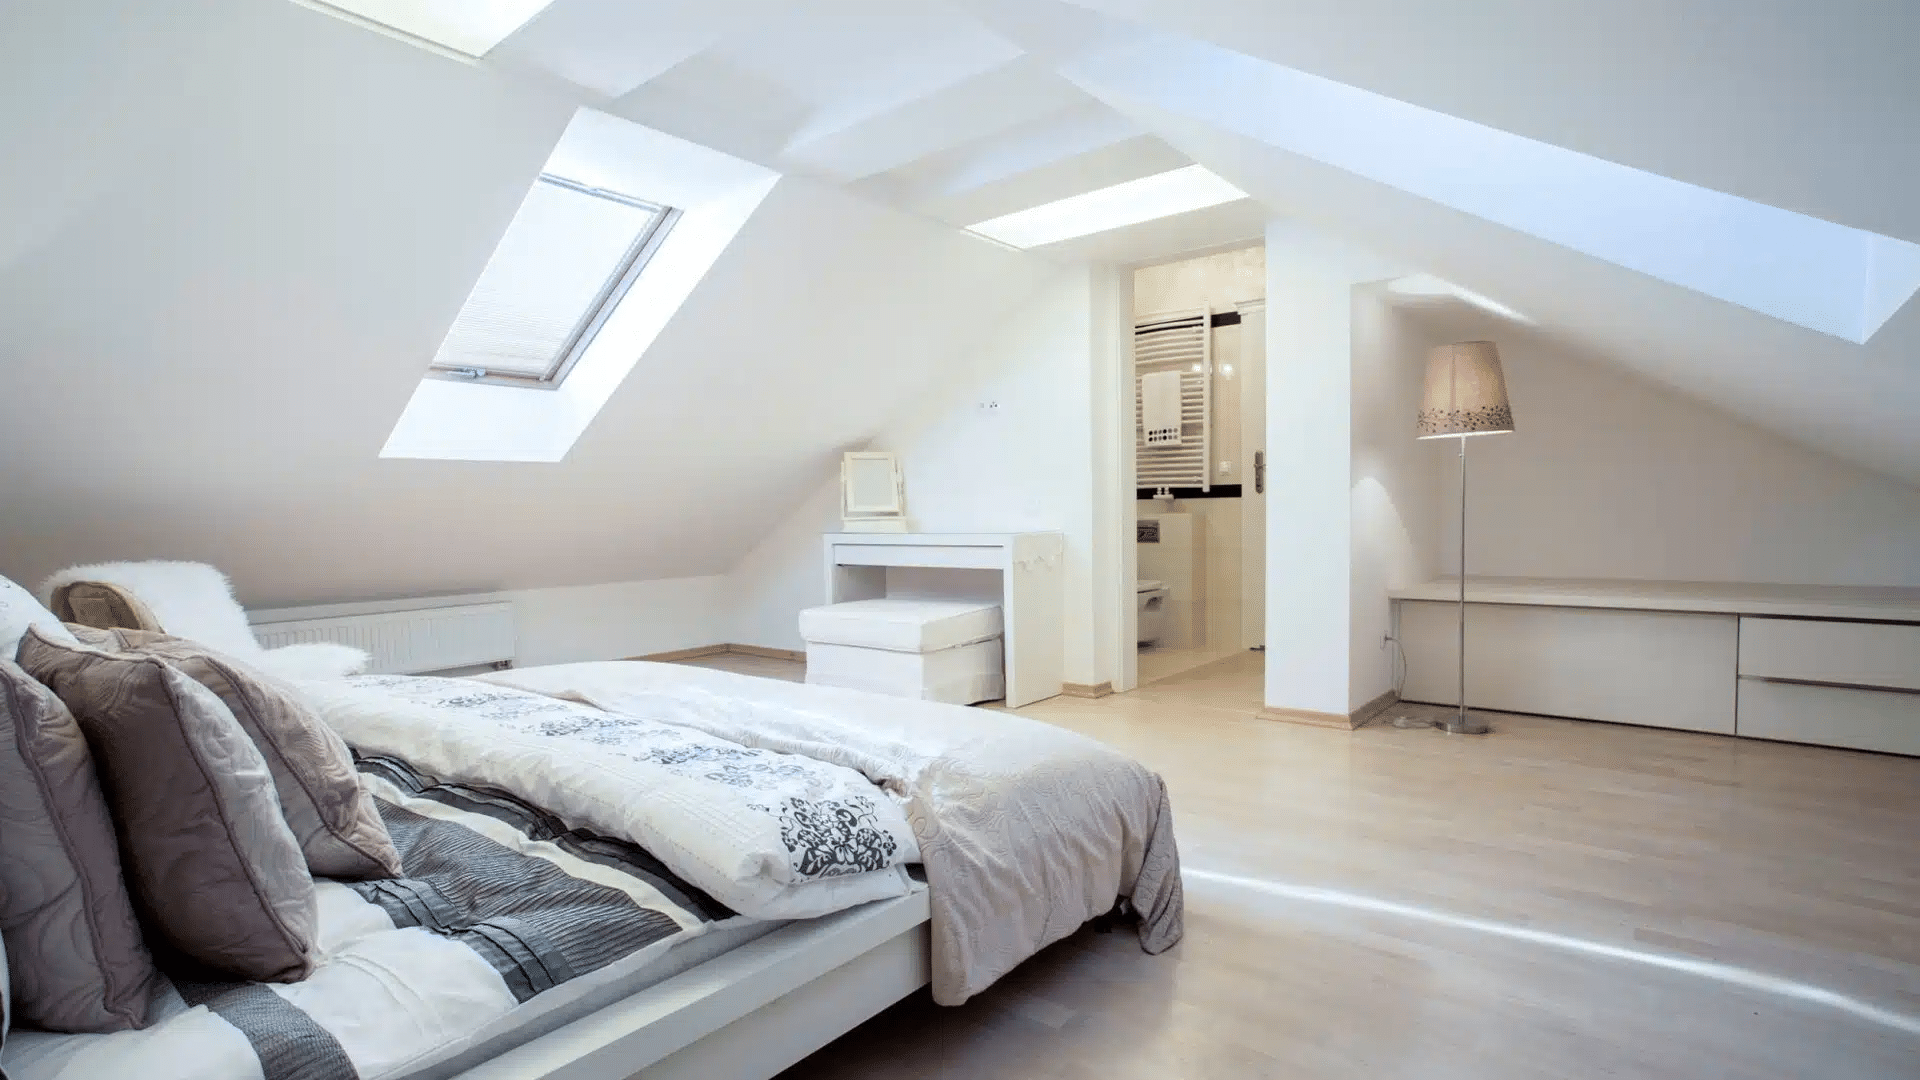 Dormer conversion white room with bed made and bathroom